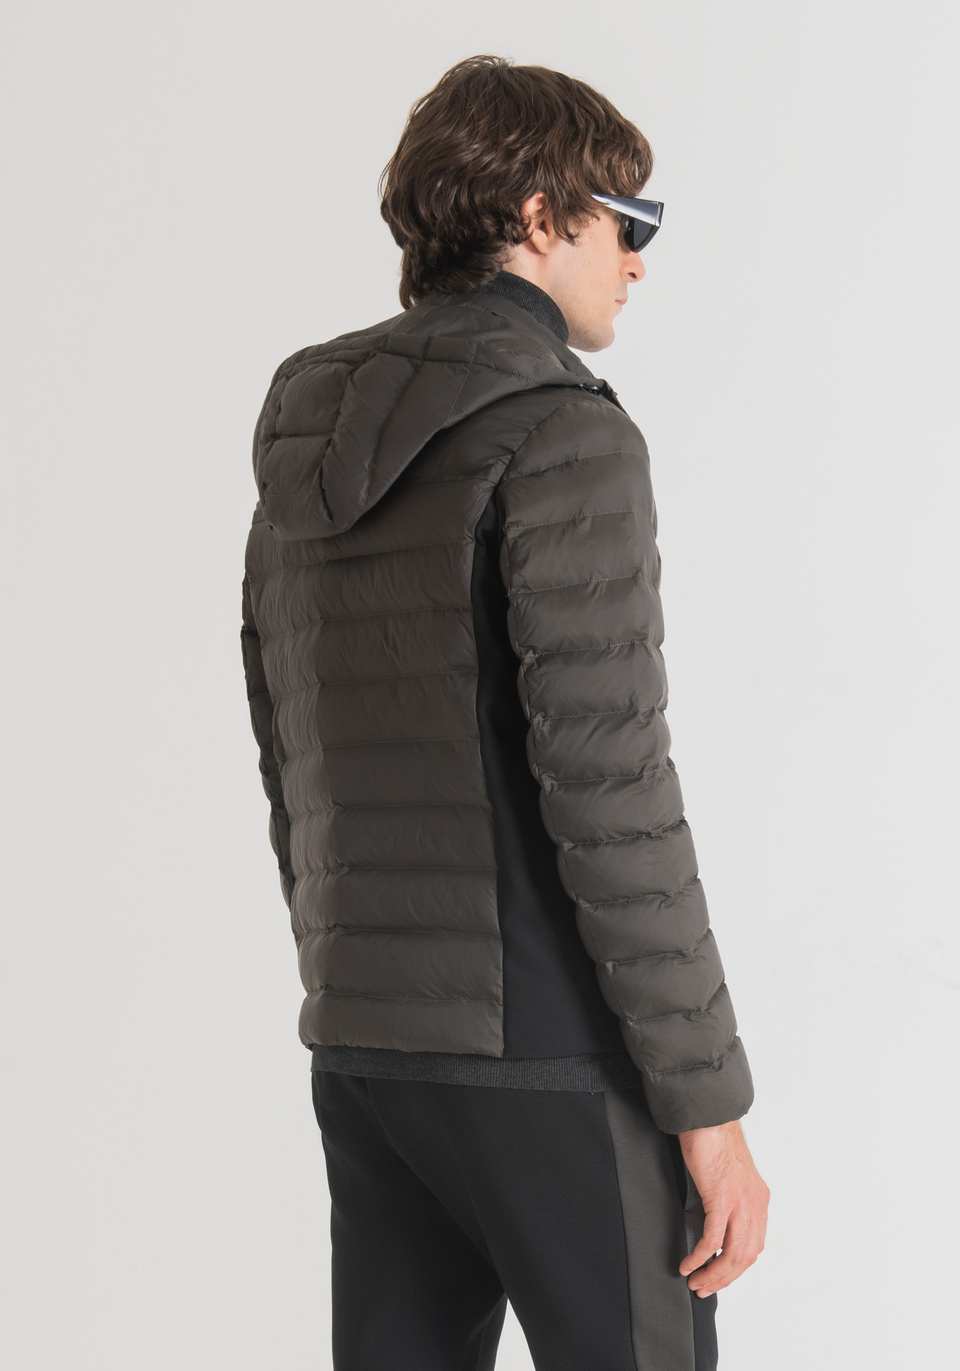 SLIM FIT QUILTED JACKET IN TECHNICAL FABRIC WITH HOOD - Antony Morato Online Shop